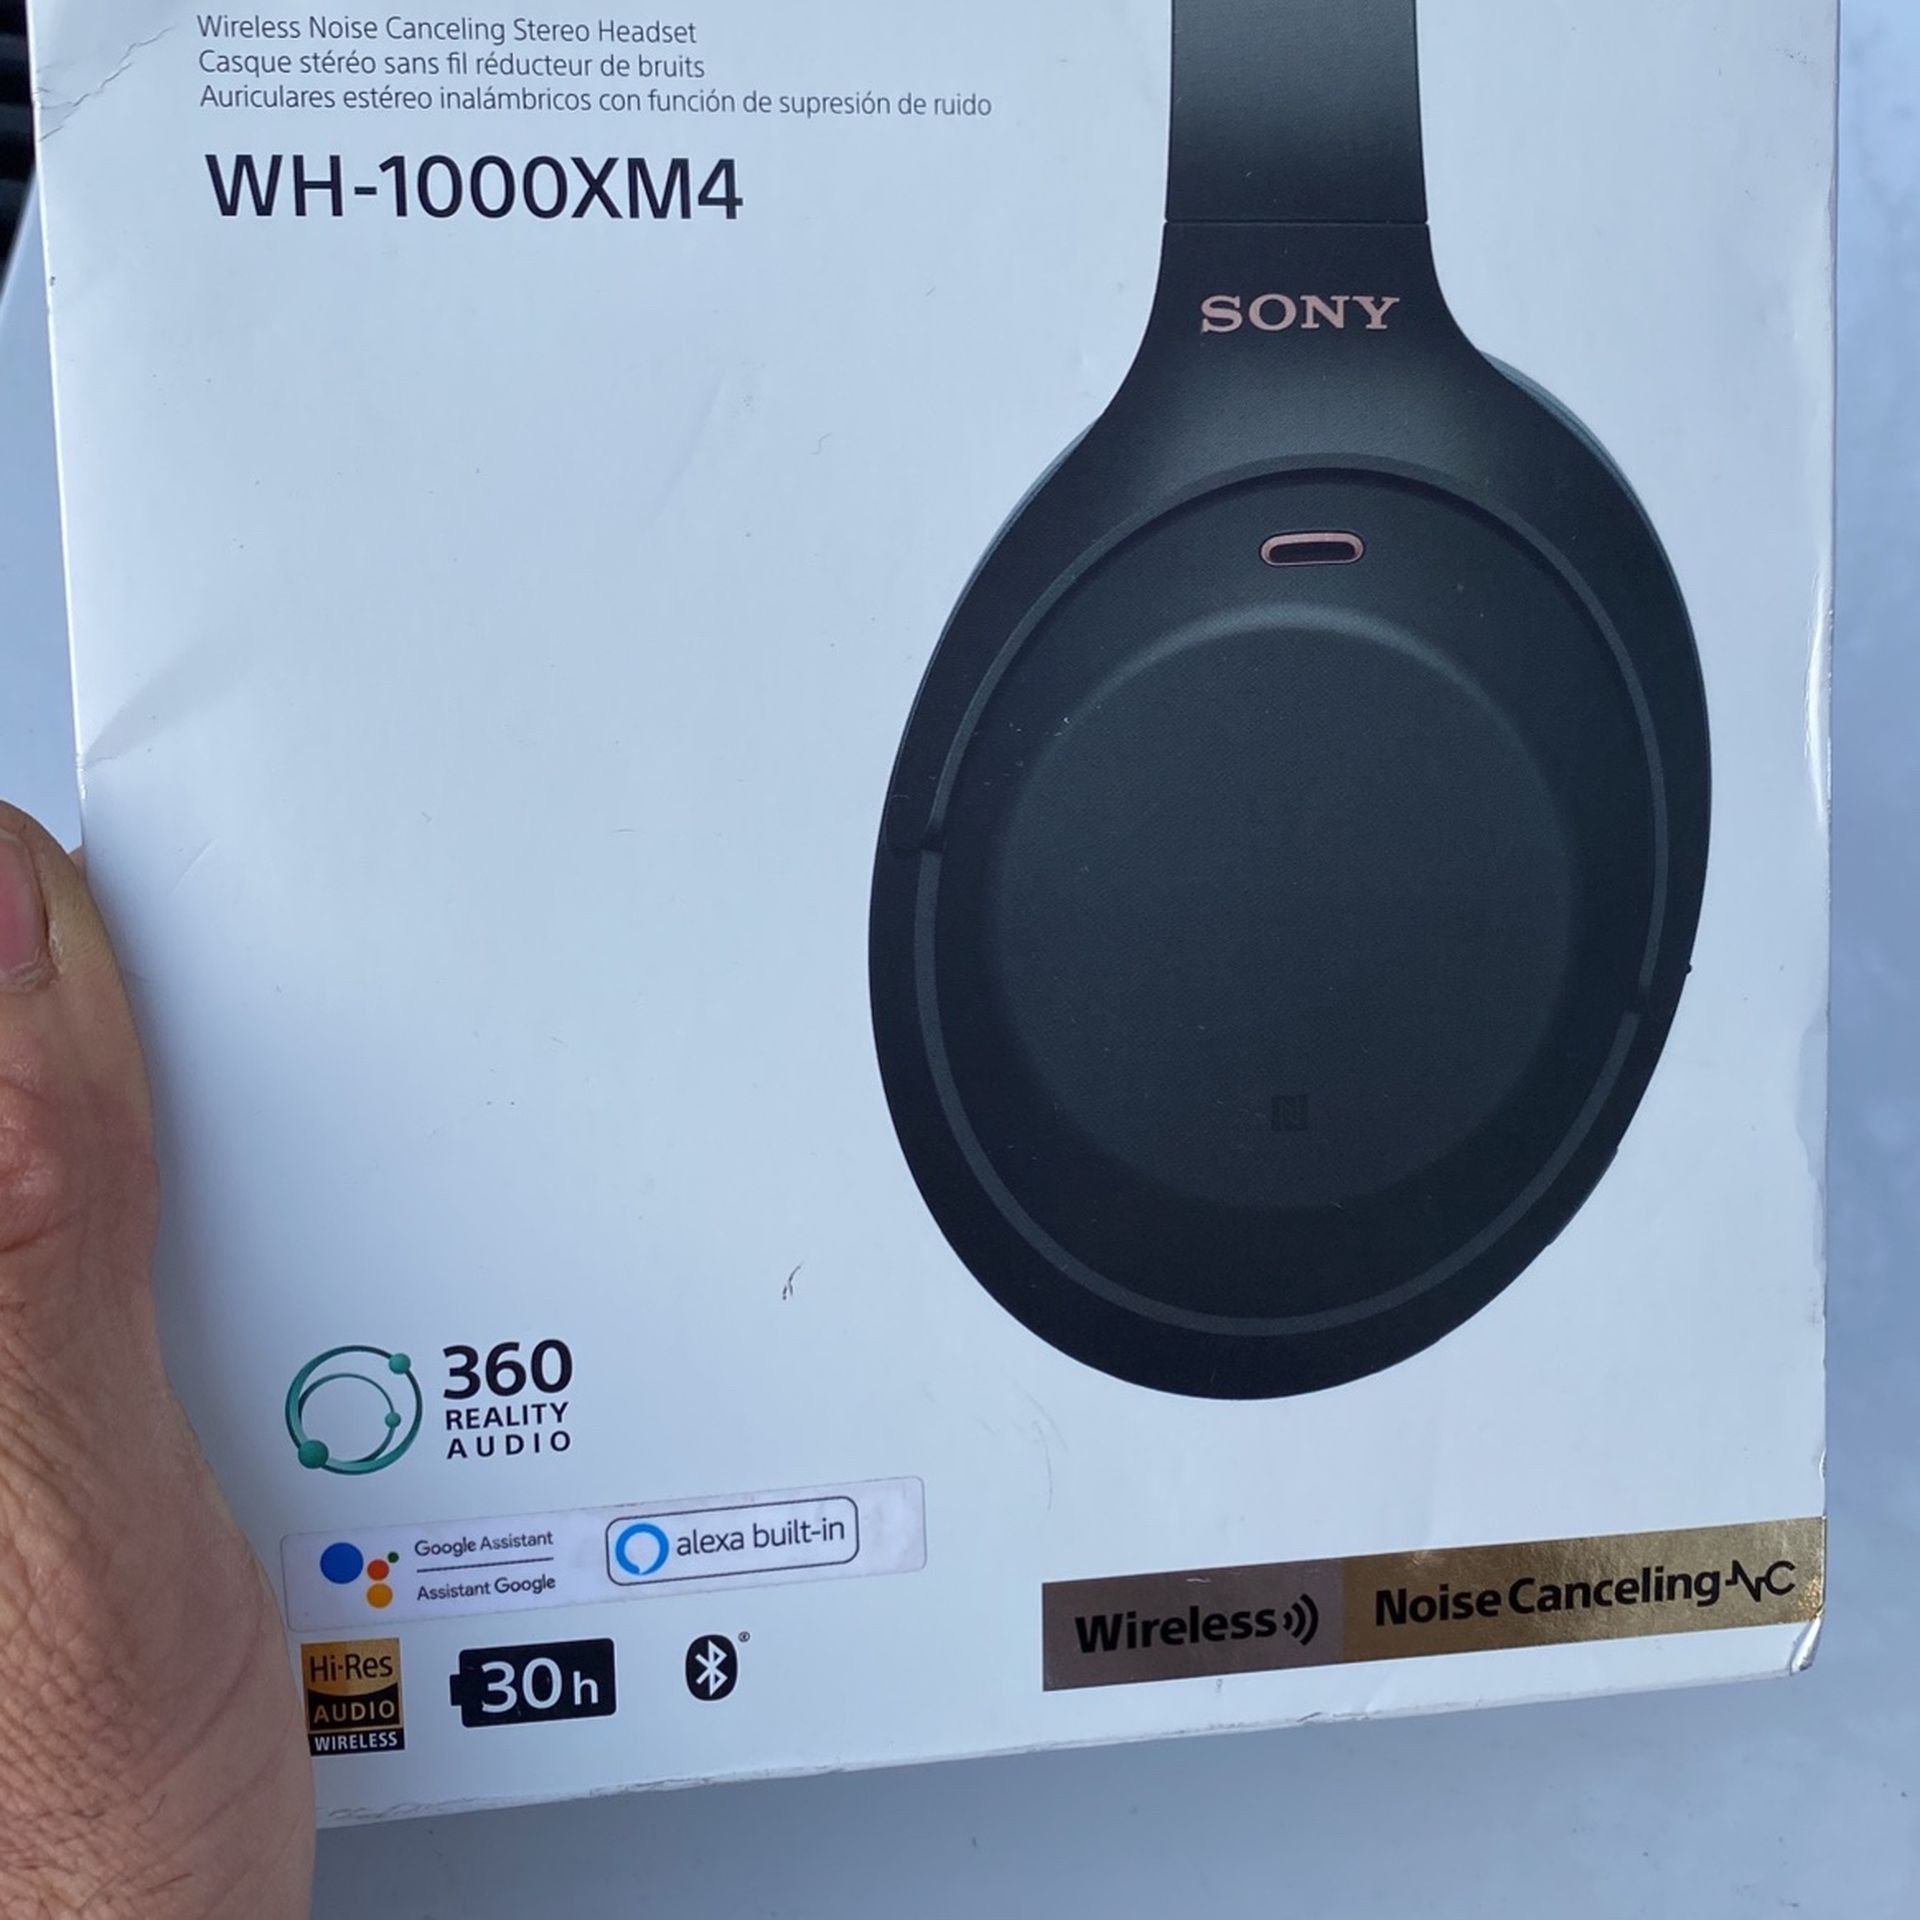 SONY HEADSETWH-1000XM4 NOISE CANCELING STEREO